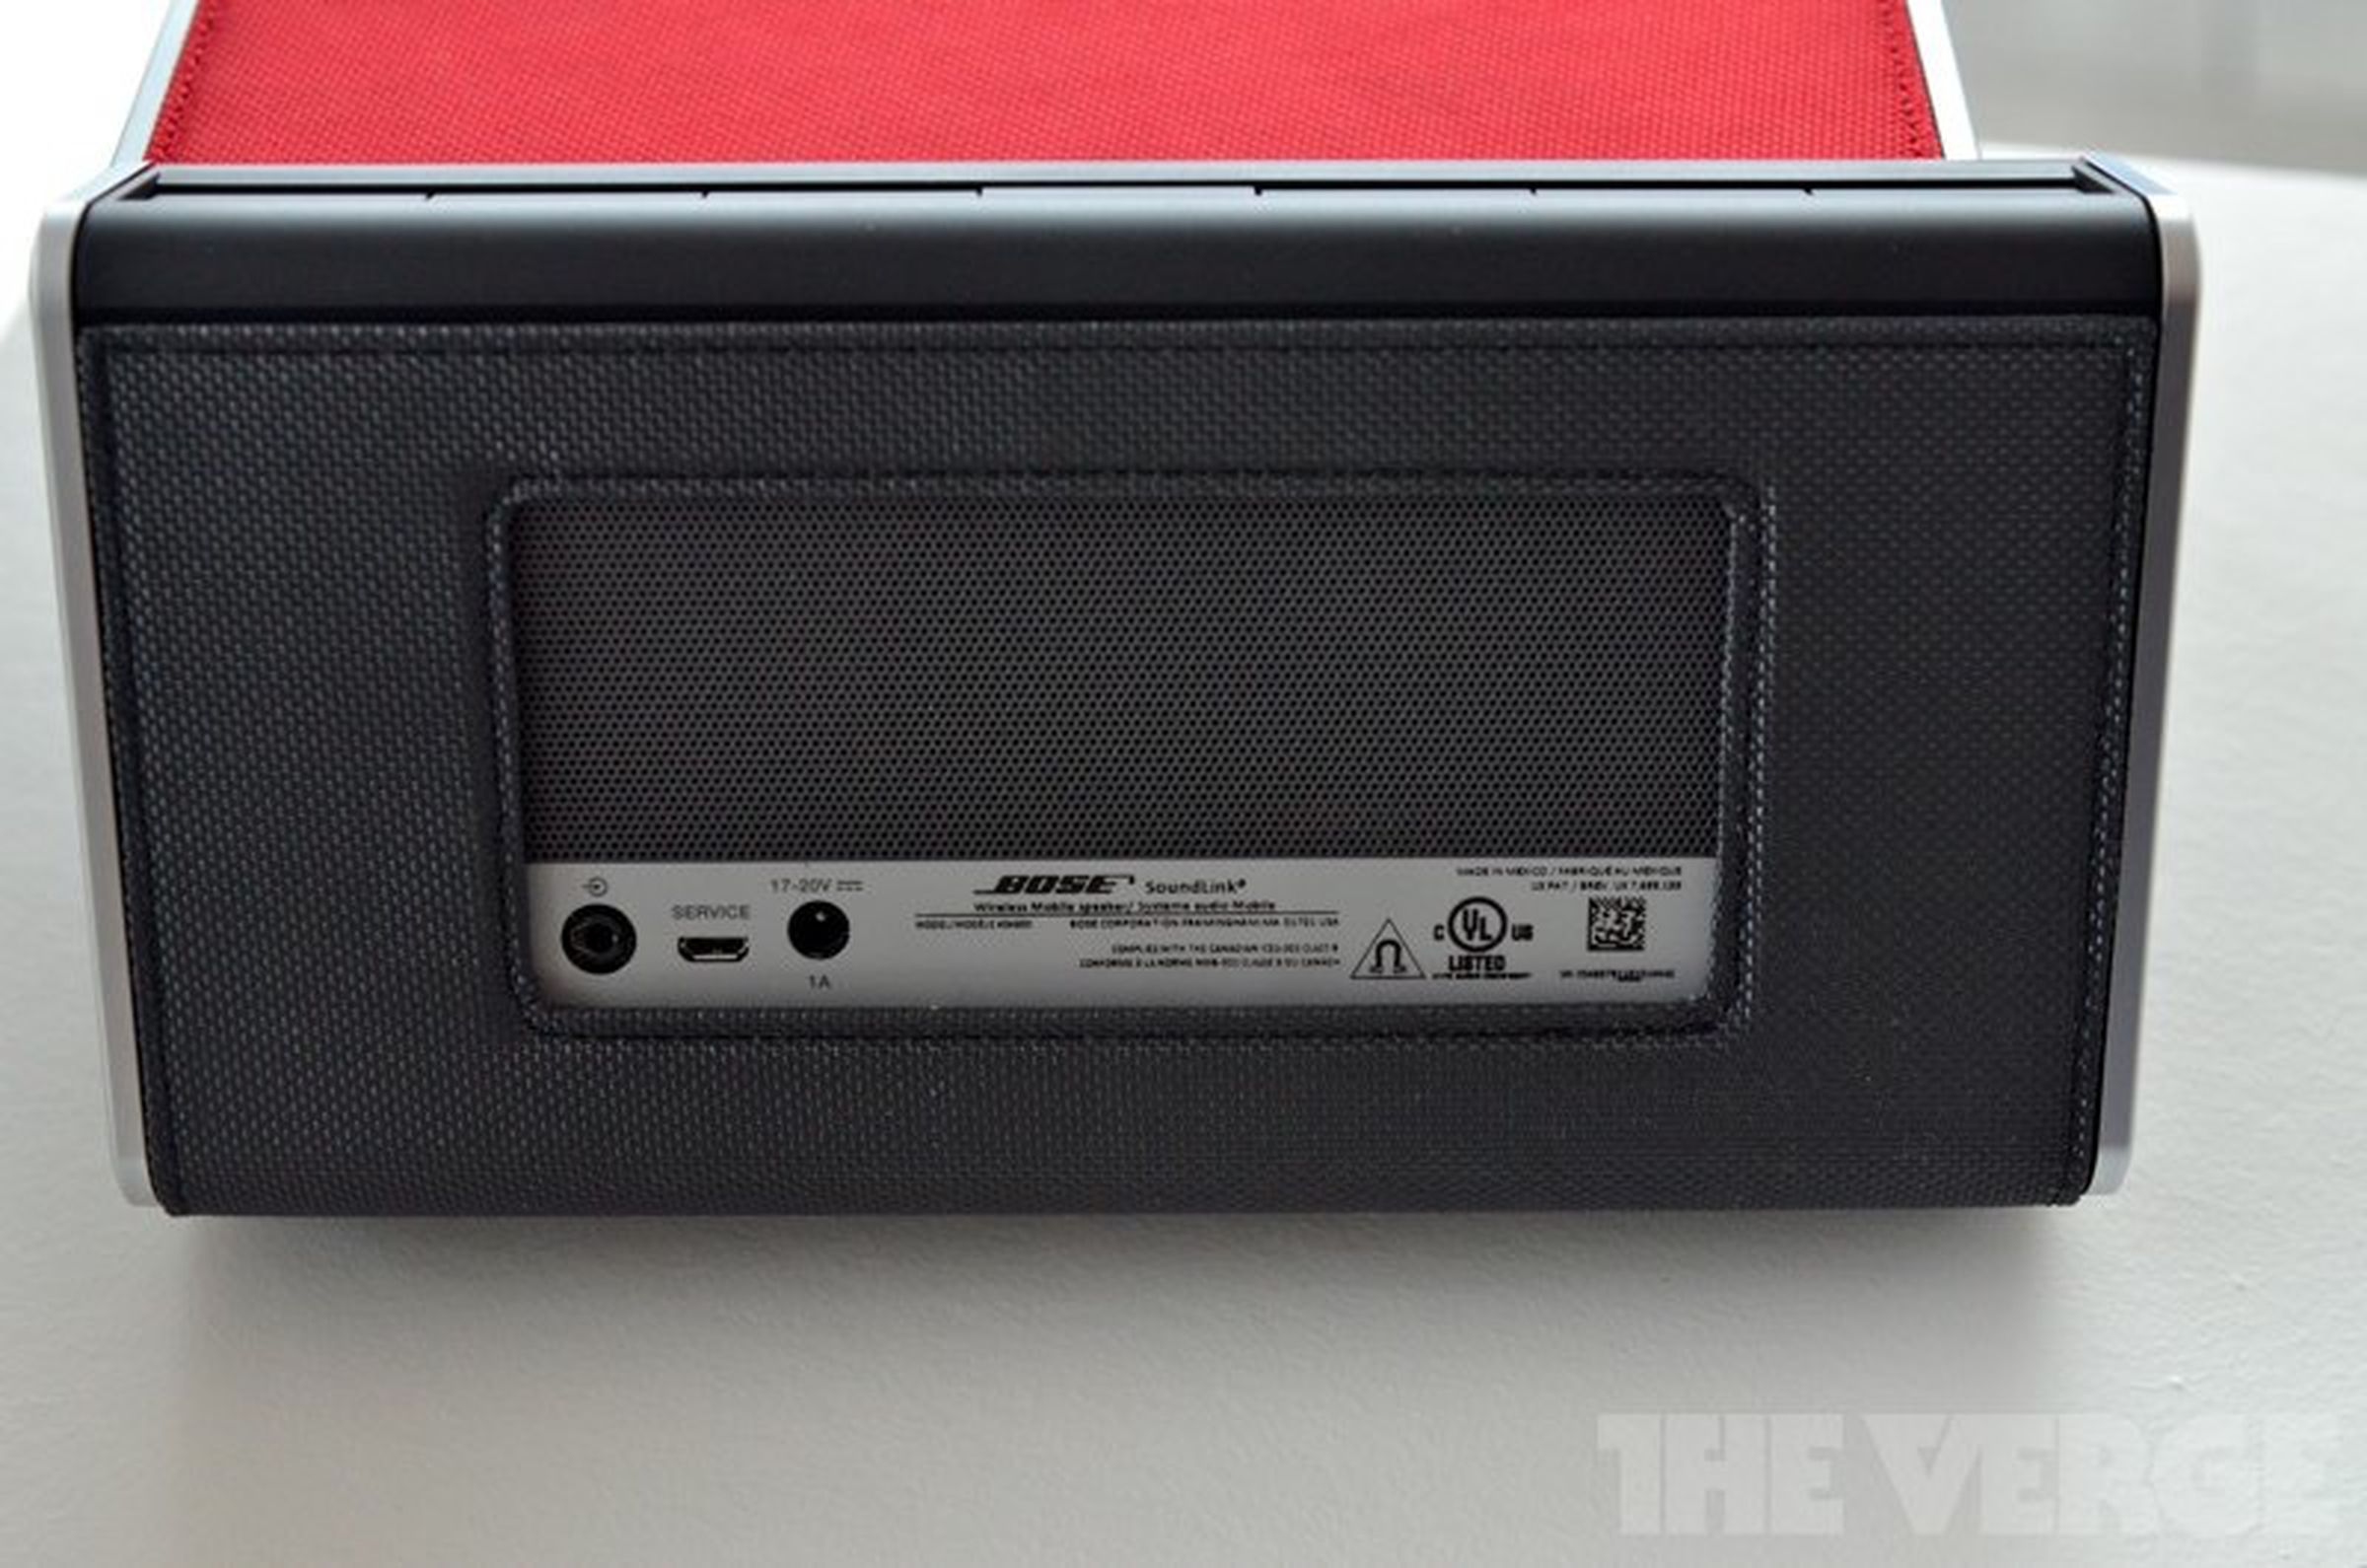 Bose Soundlink Mobile portable Bluetooth speaker announced: pictures and hands-on preview